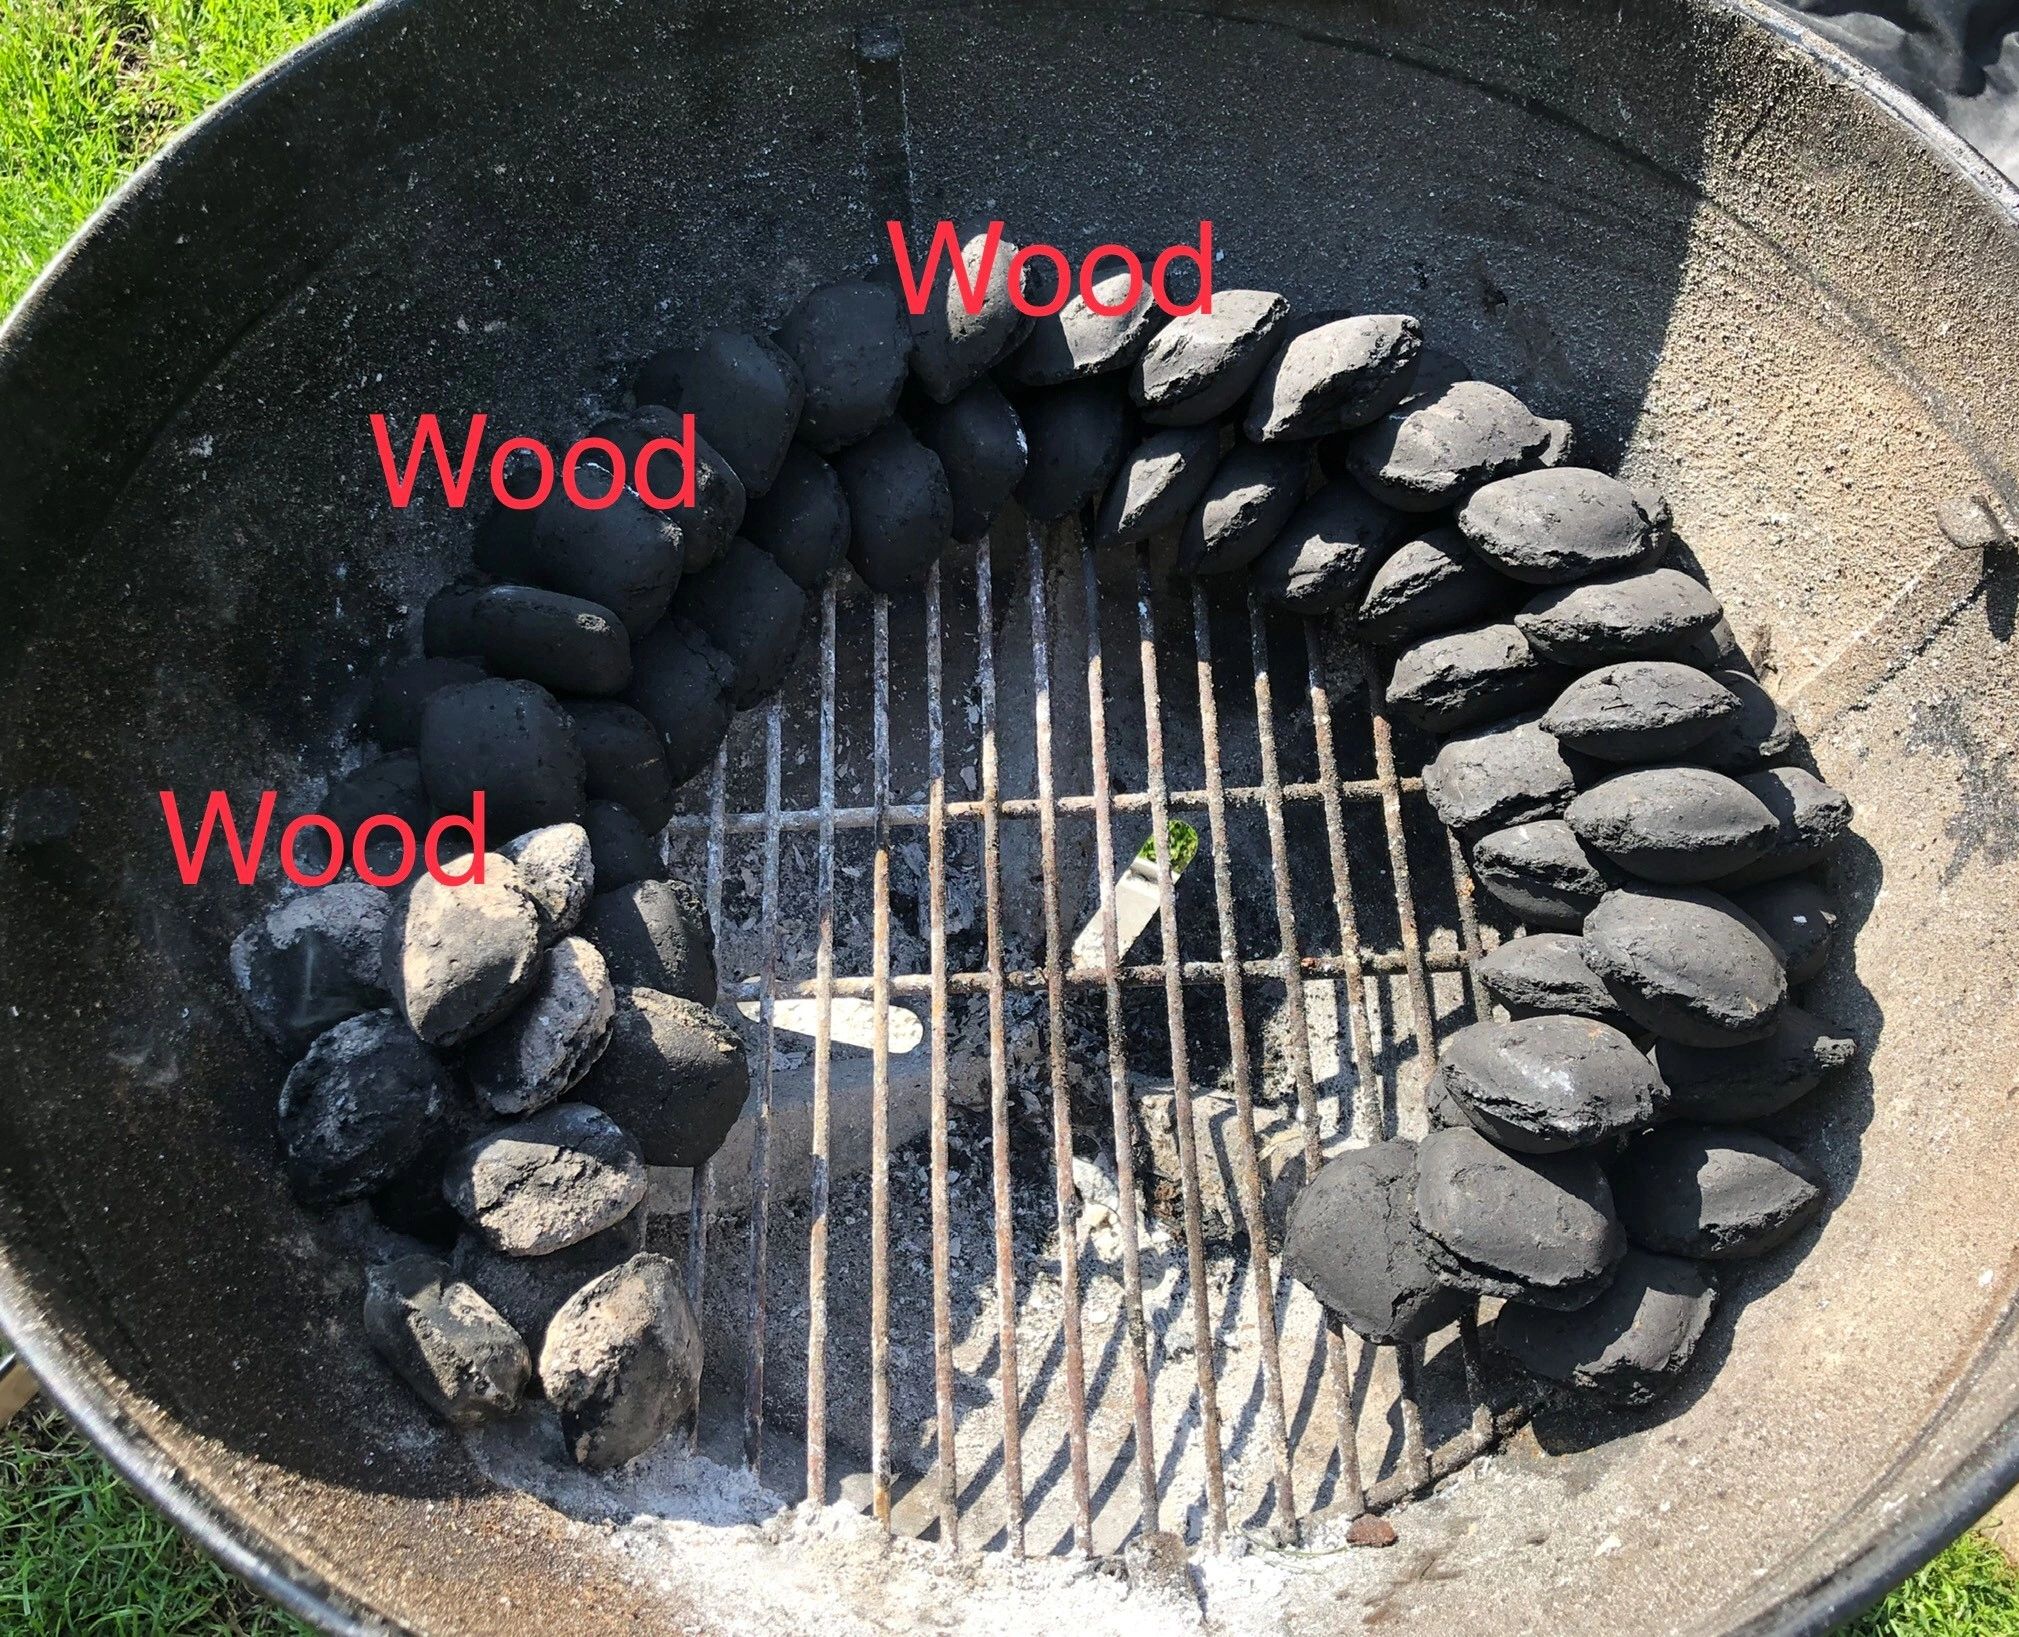 The snake method - turning your grill into a smoker